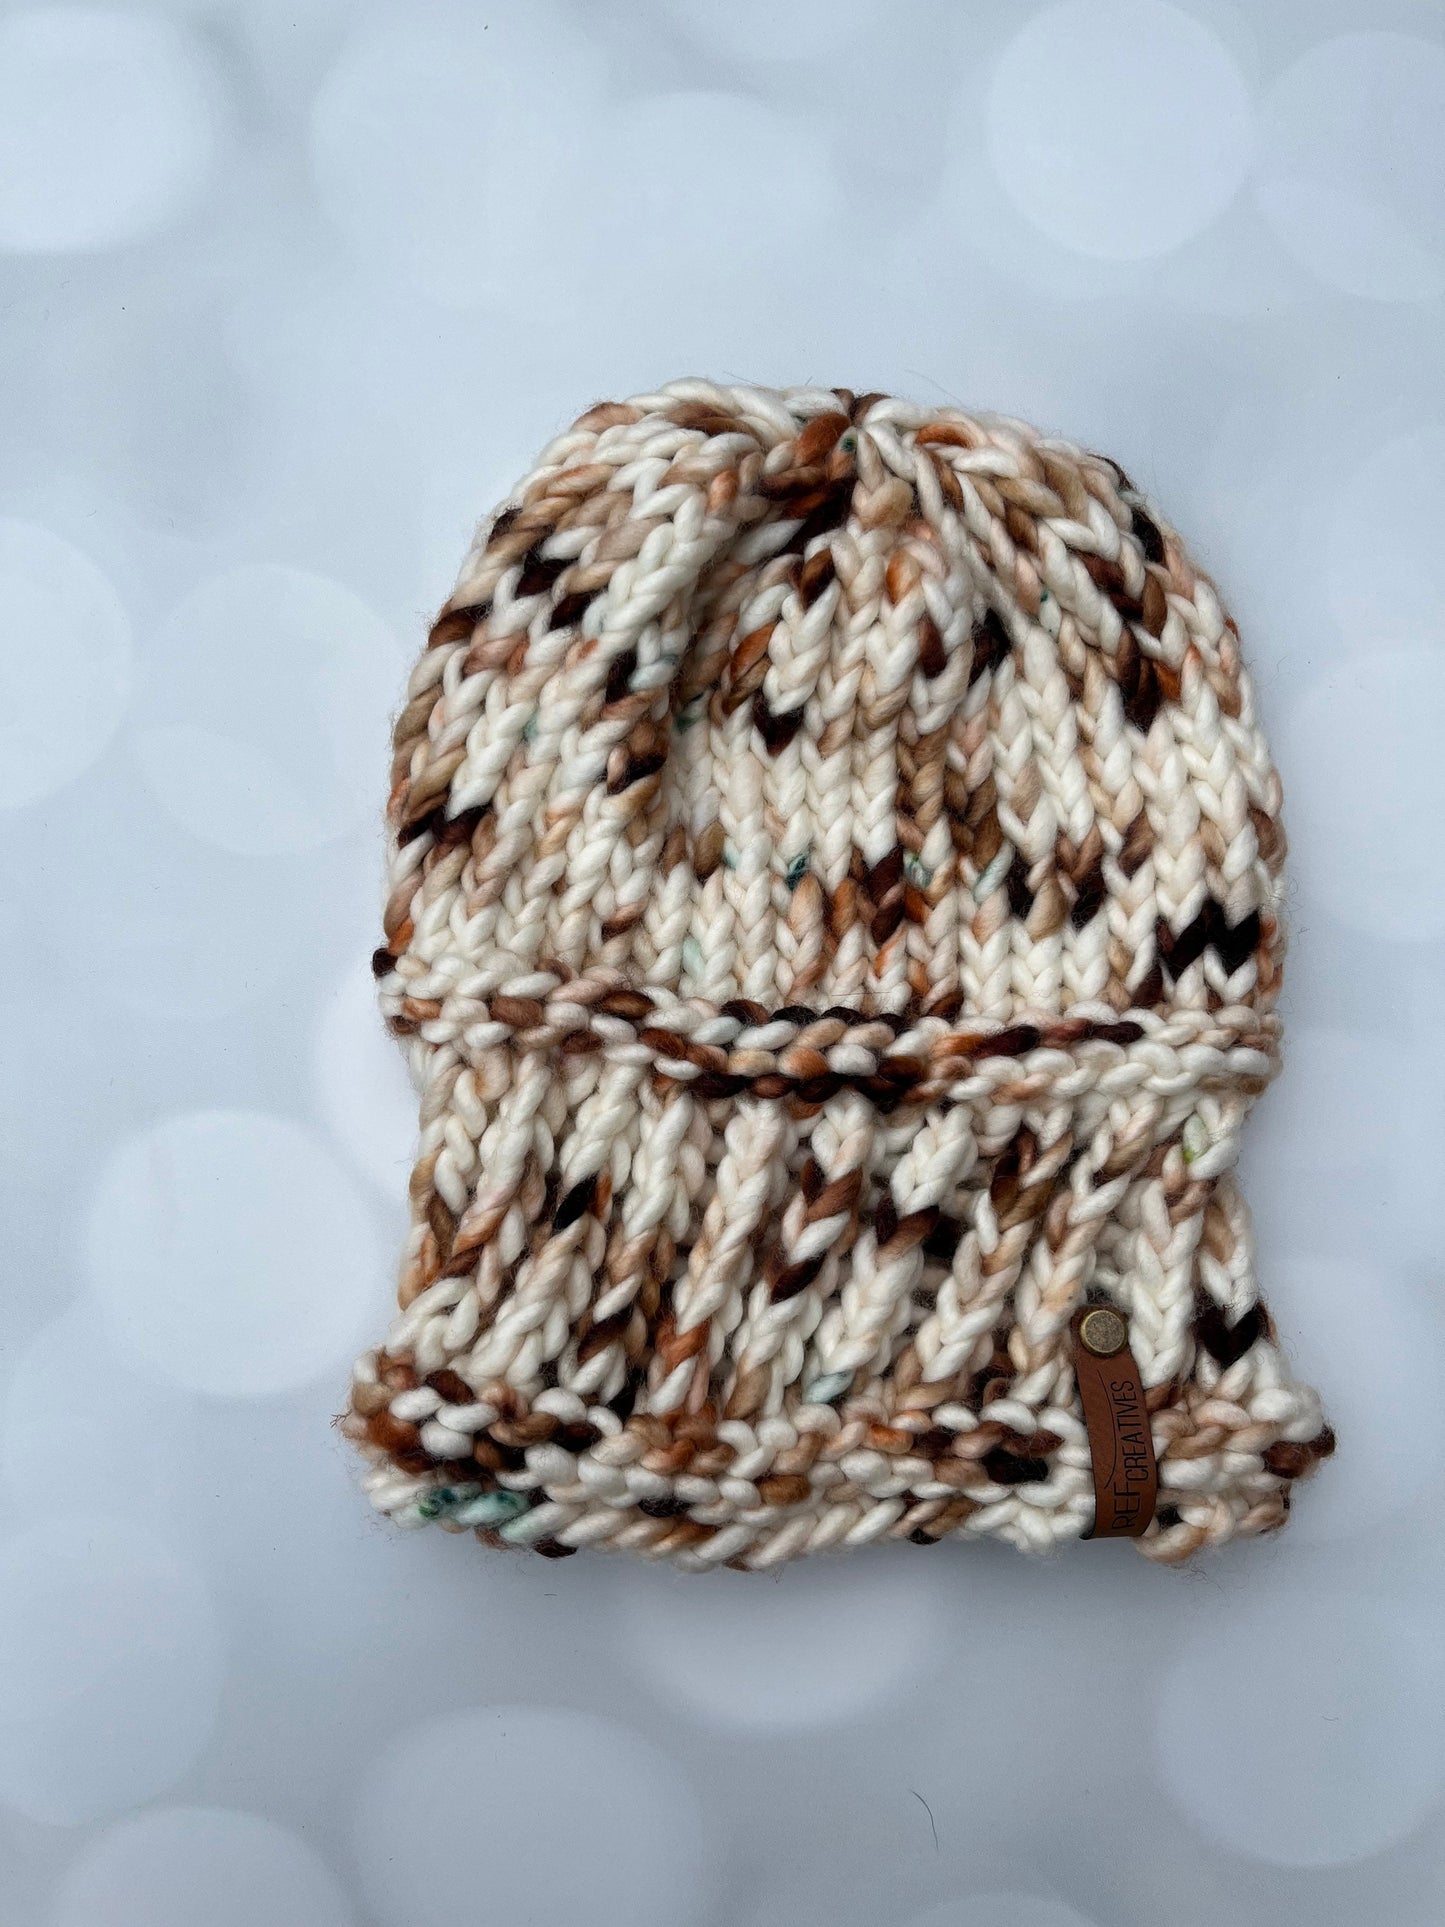 Luxury Brown Merino Wool Knit Hat - Twisted Brim Beanie Hand Knit Hat with Hand Dyed Yarn